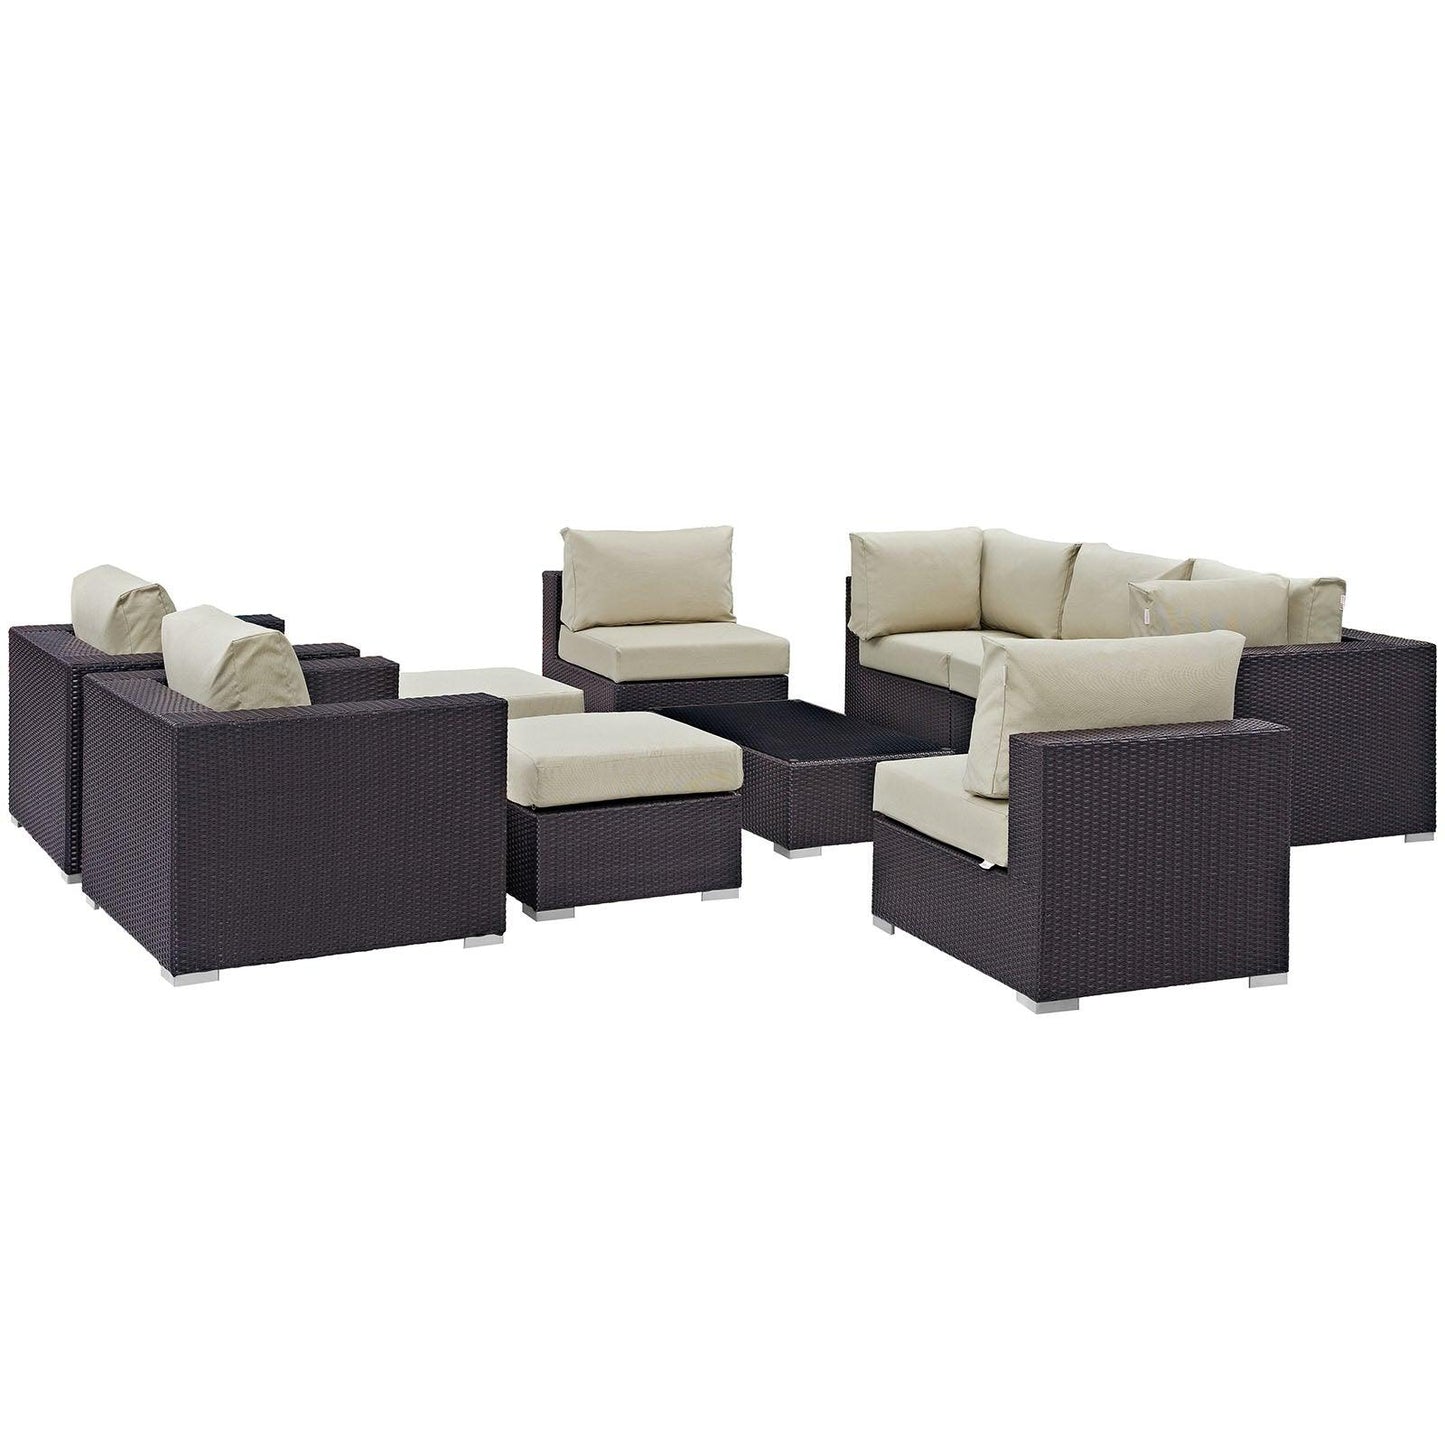 Modway Convene 10 Piece Outdoor Patio Sectional Set FredCo